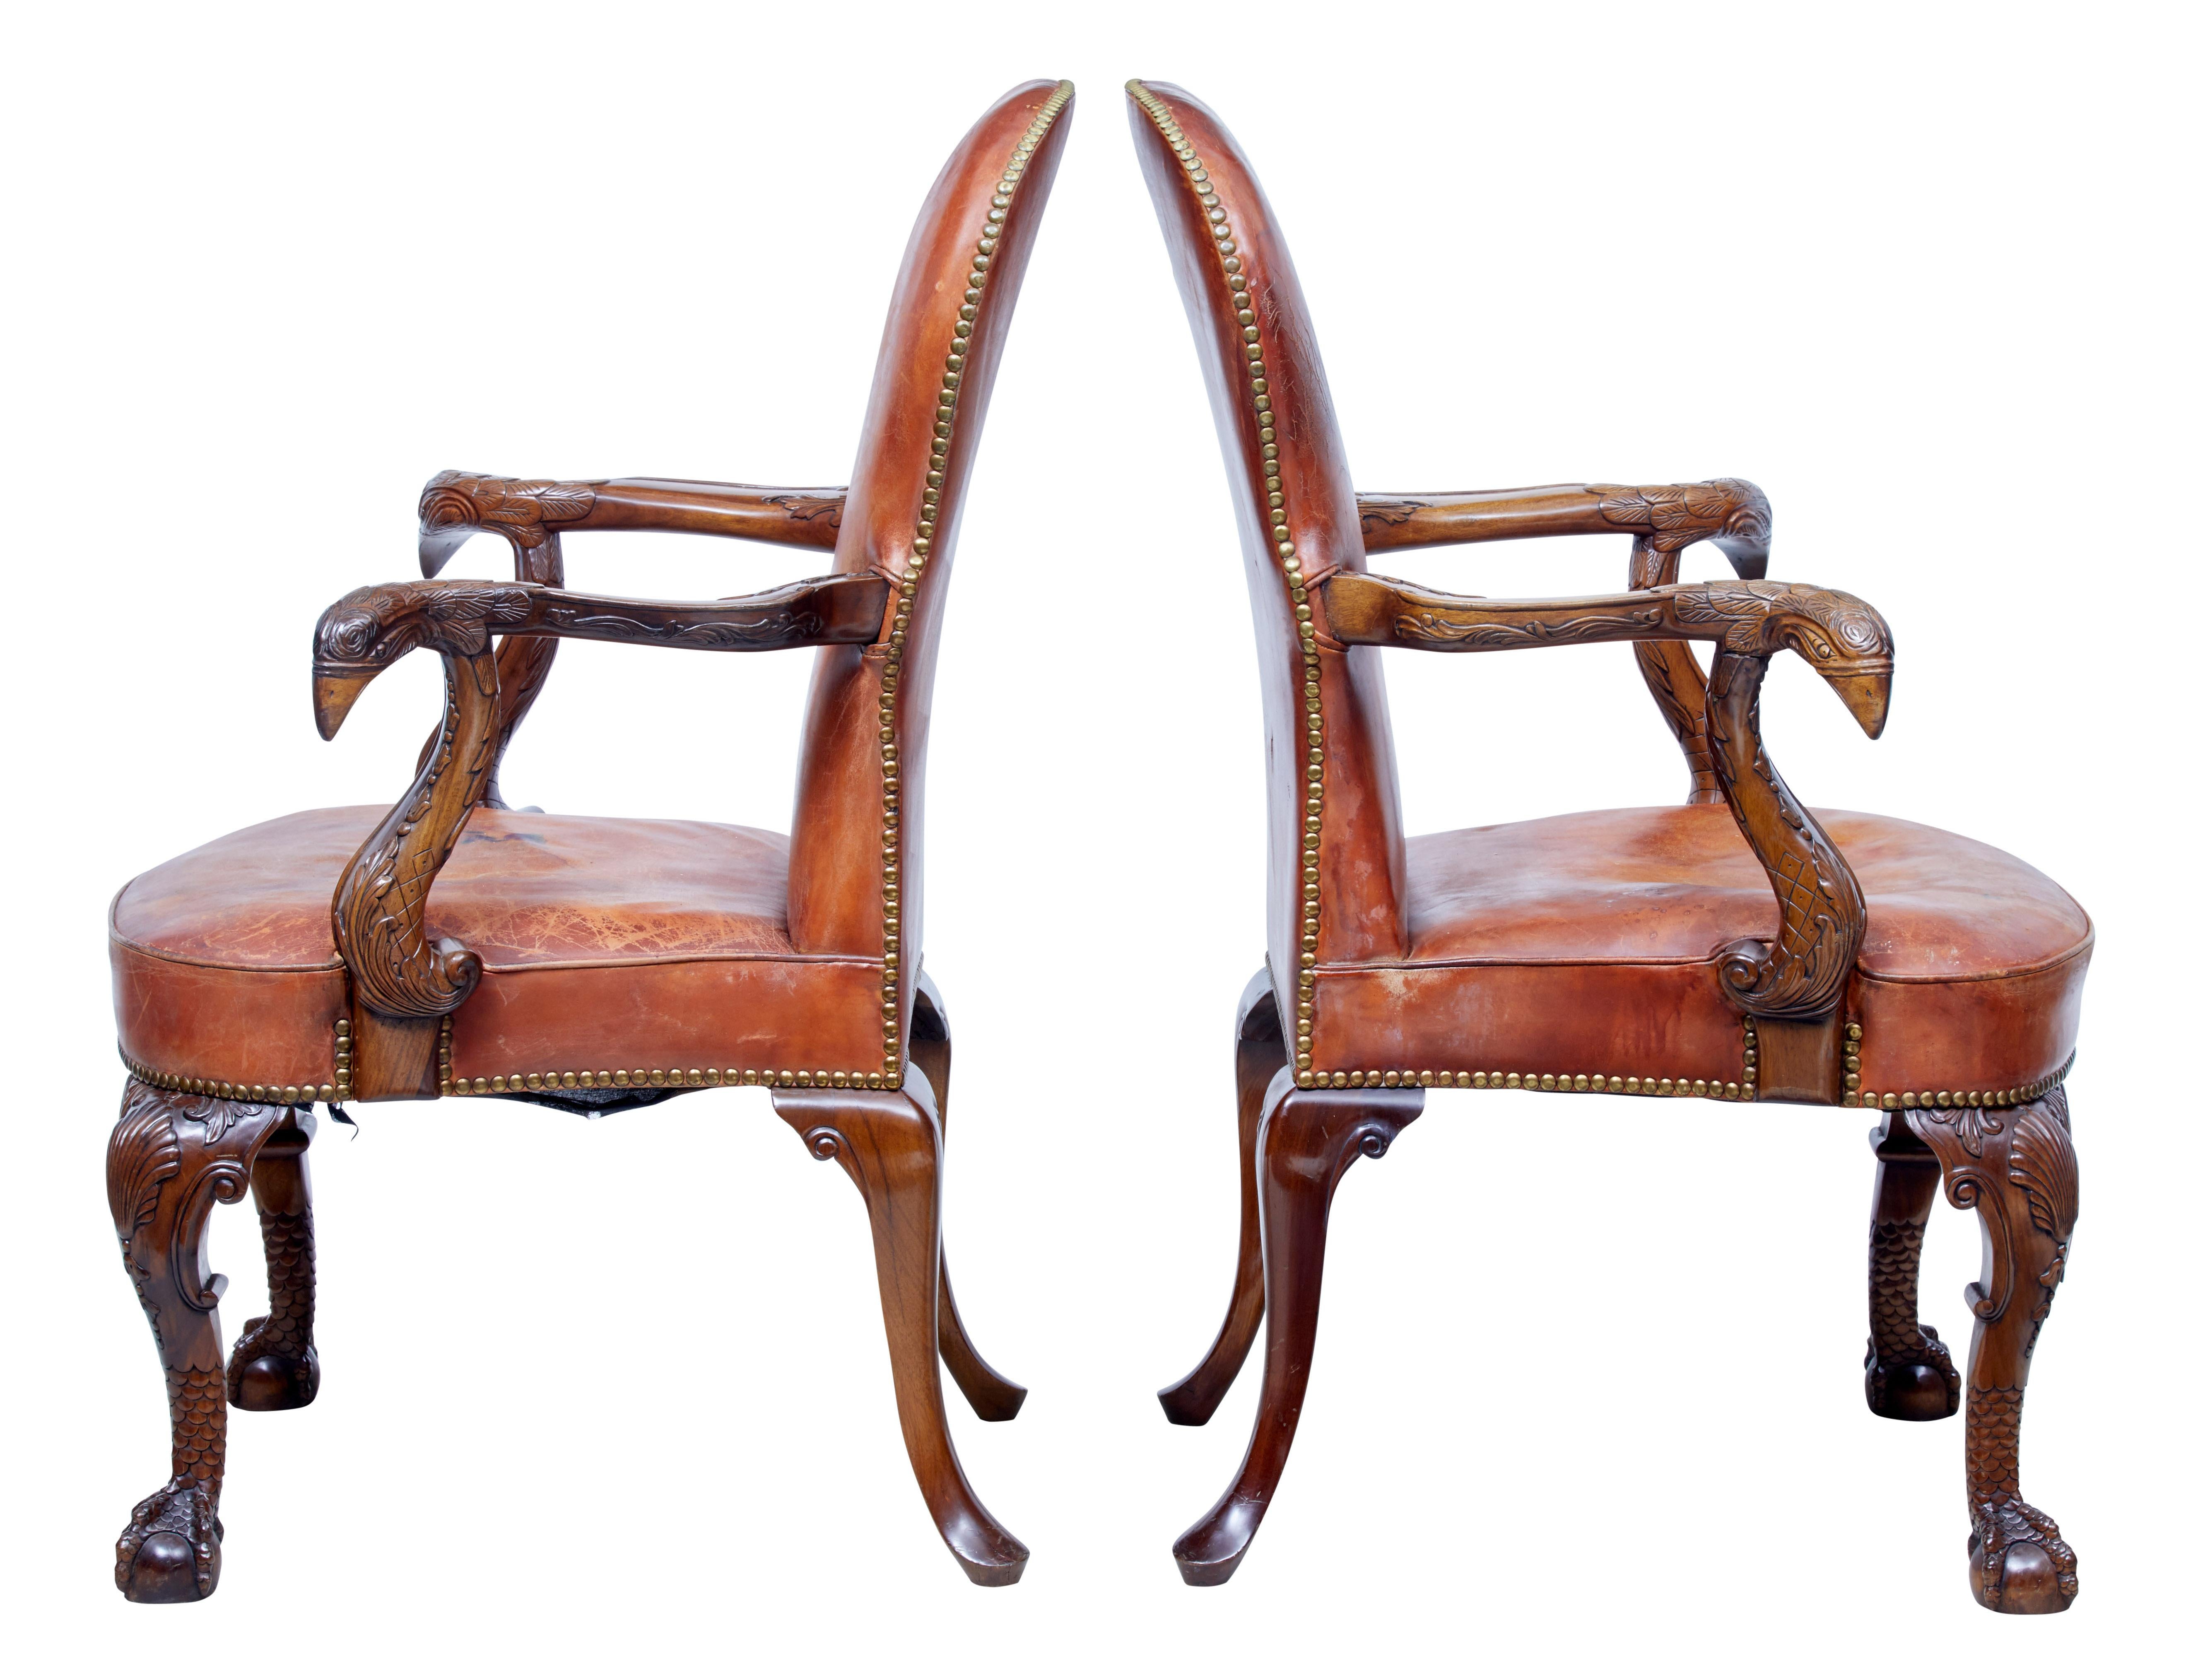 Rare fine quality English made mahogany armchairs, circa 1950.

Tan leather upholstery, carved open arms with swags and a possible peacock head. Standing on carved front legs with shell on the knee and a scaled ball and claw foot. Back legs